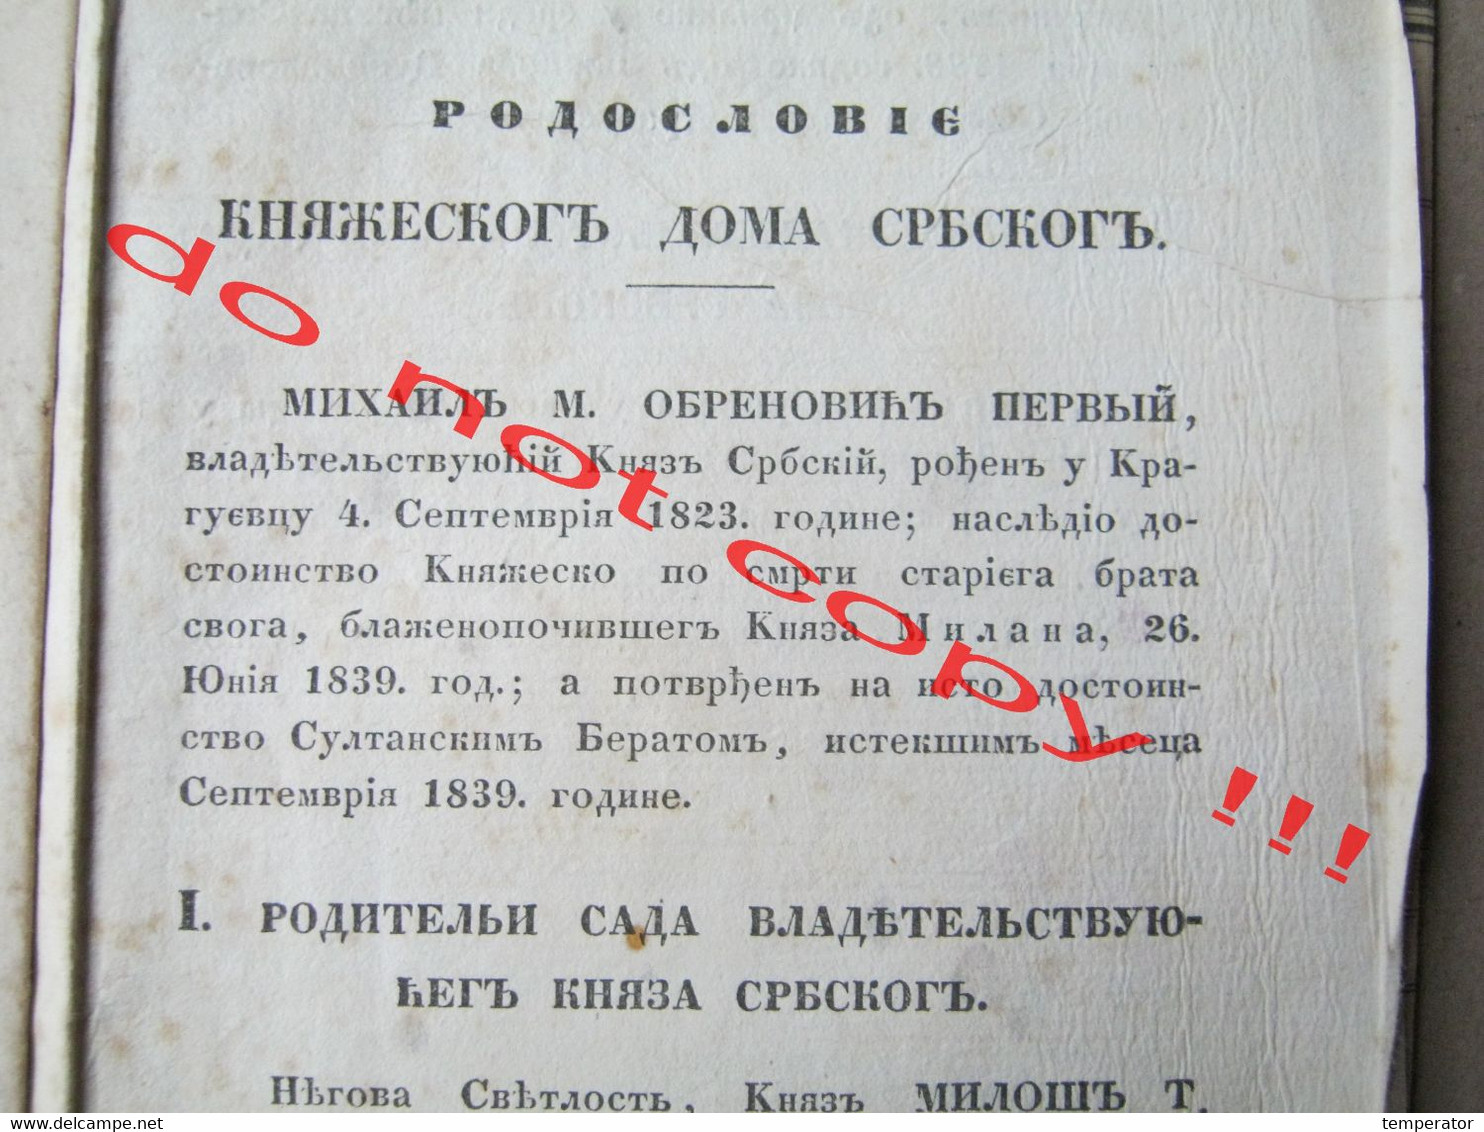 Original calendar from 1841-Jewish, Turkish, about European rulers Genealogy of the Prince's Home of Serbian in Cyrillic